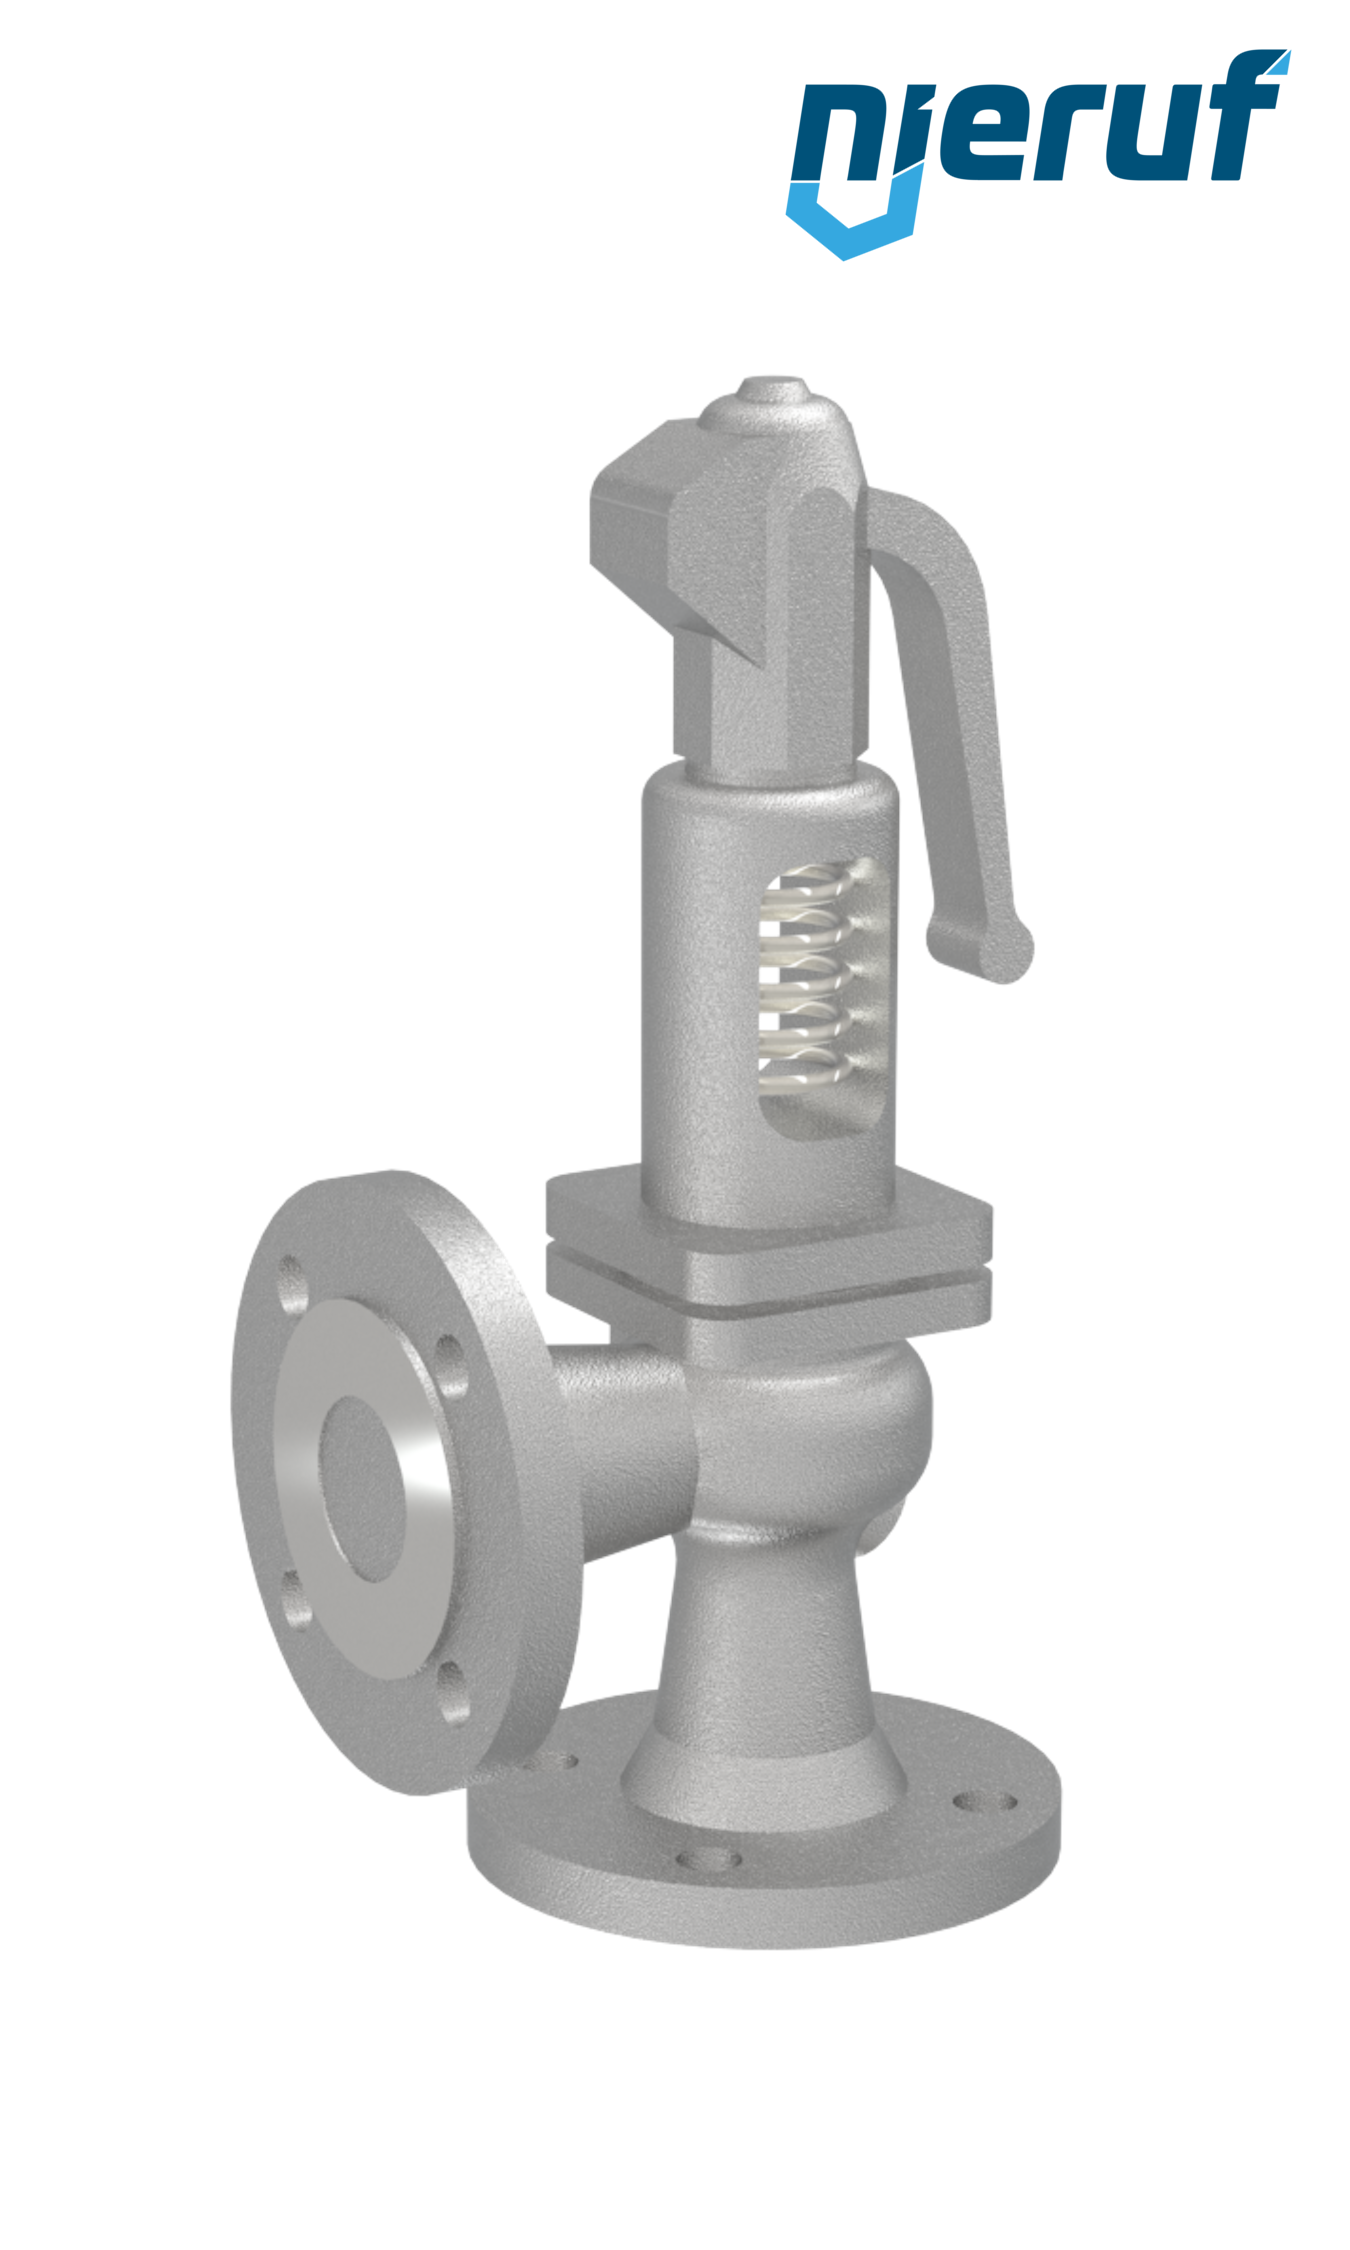 flange-safety valve DN100/DN100 SF0202, cast steel FPM, with lever